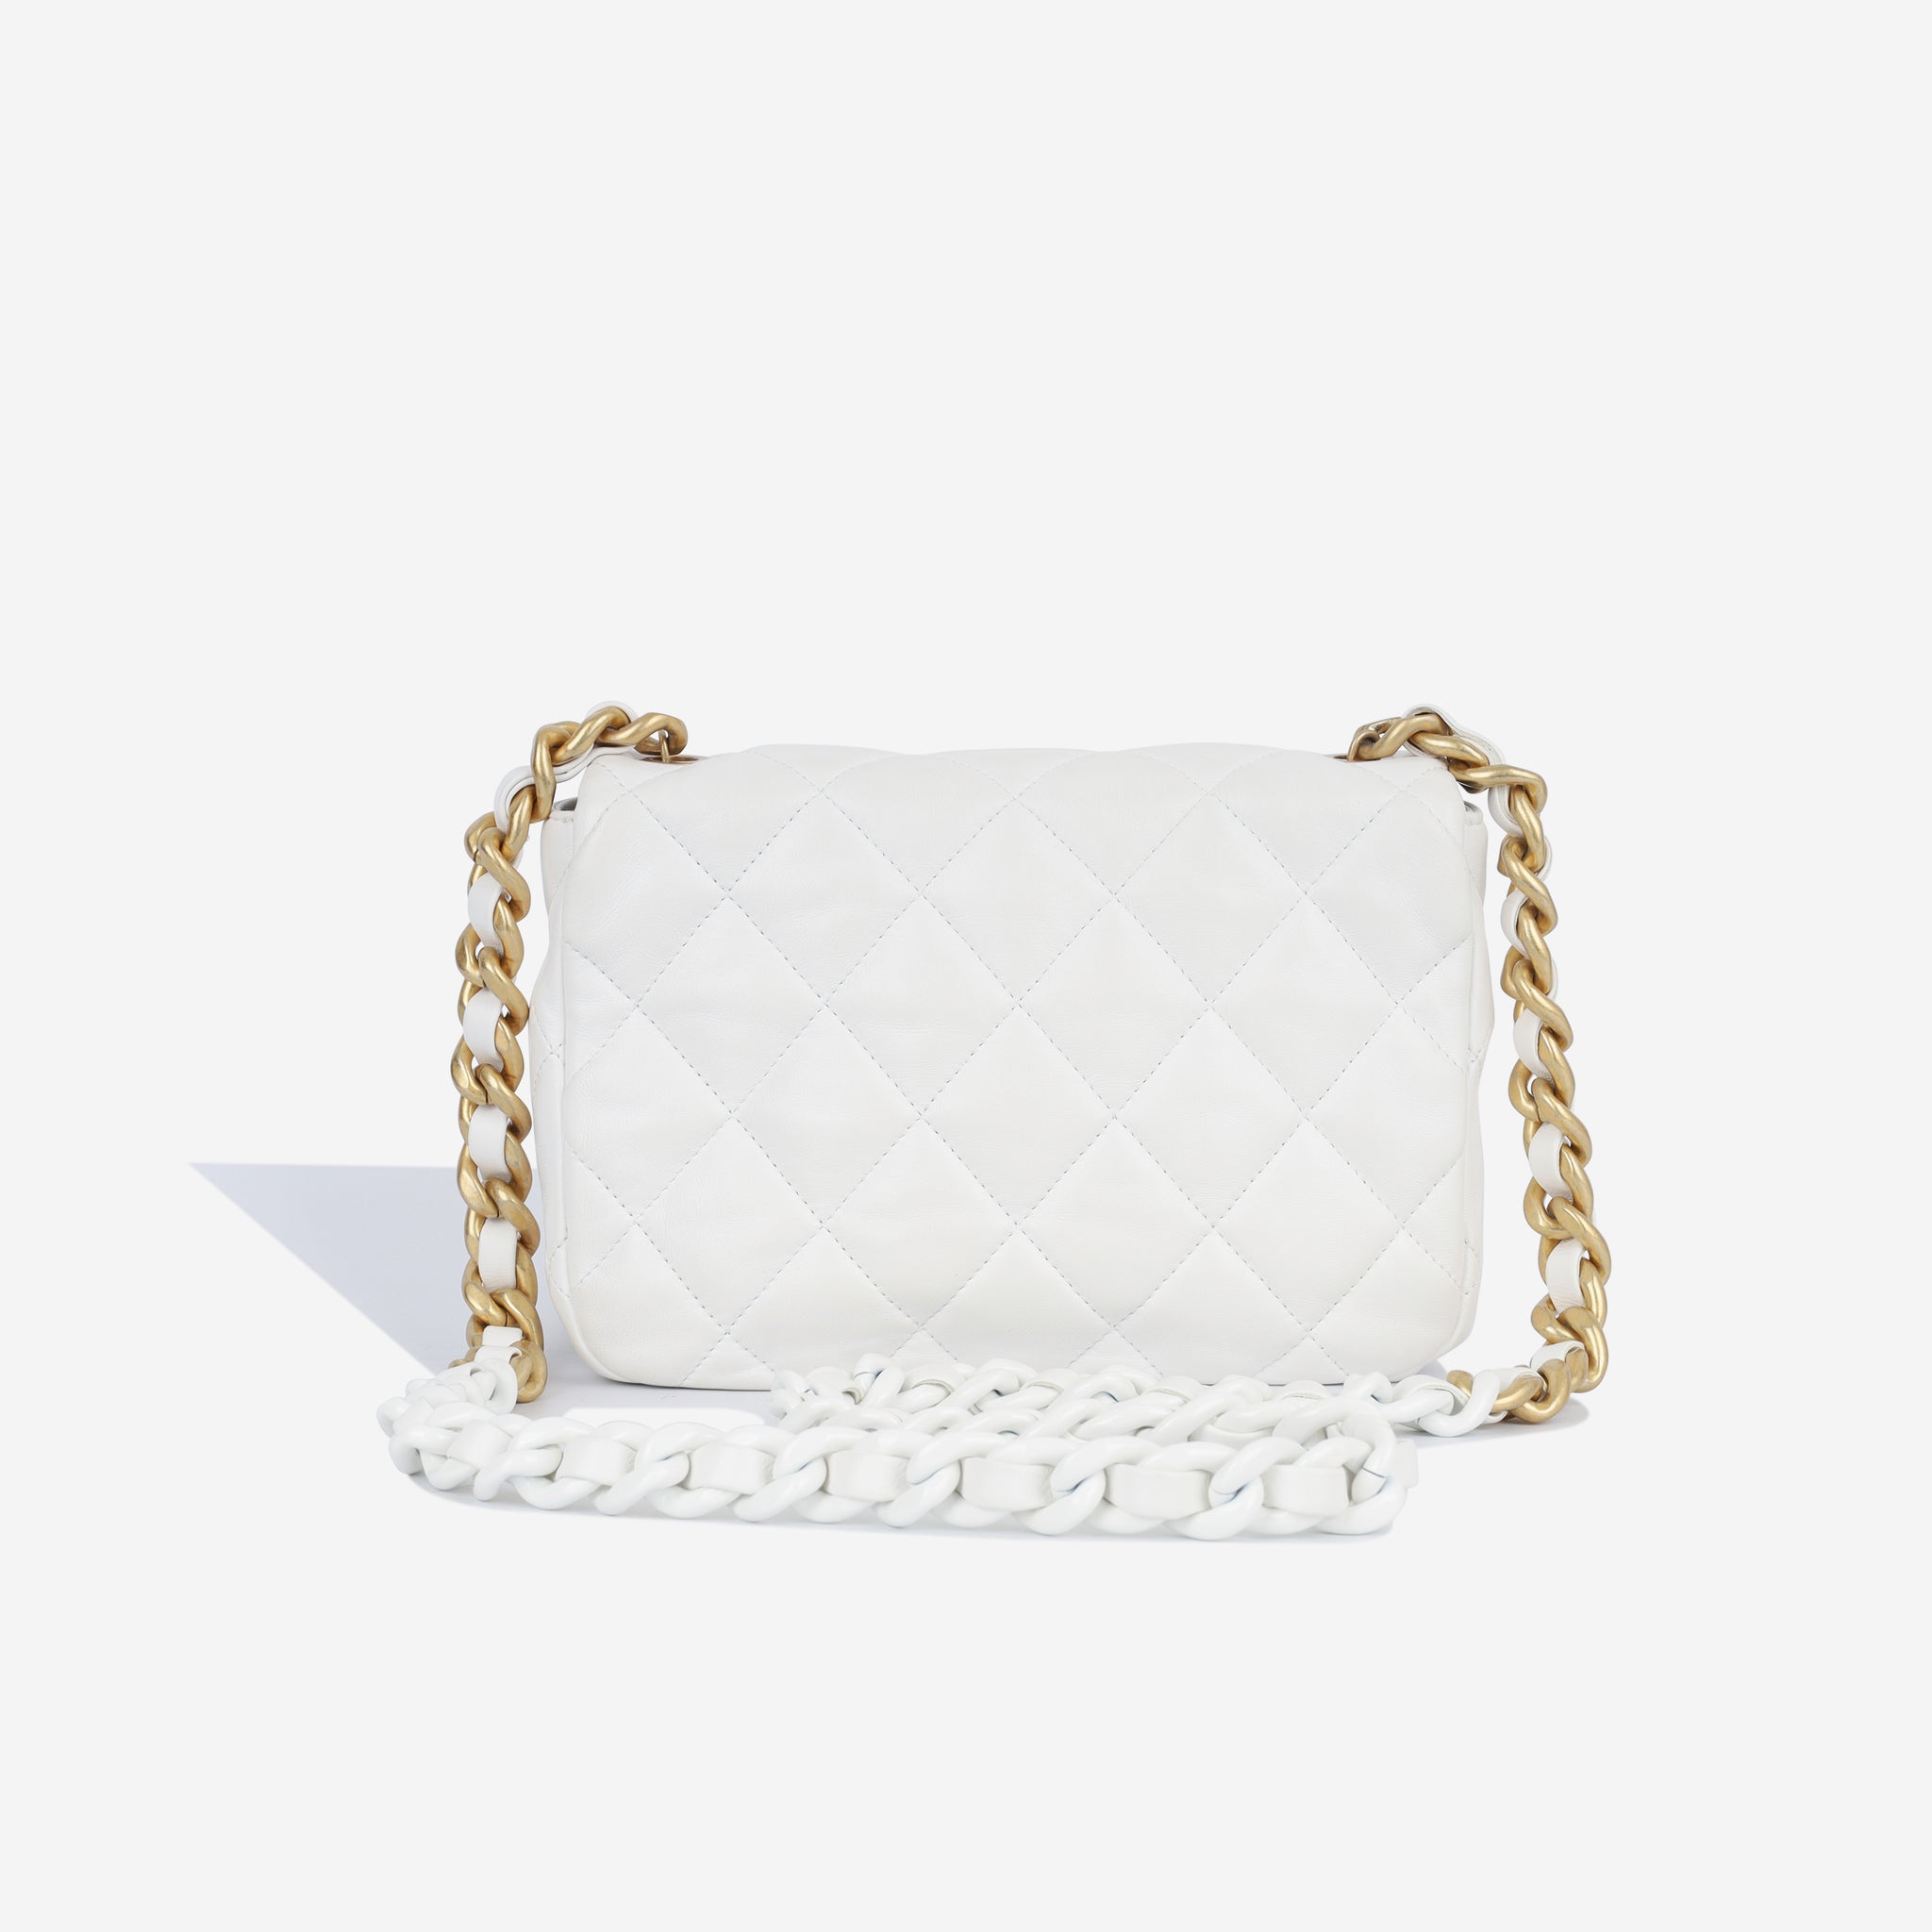 Chanel - Lacquered Chain Flap Bag - White Lambskin GHW - Pre-loved ...